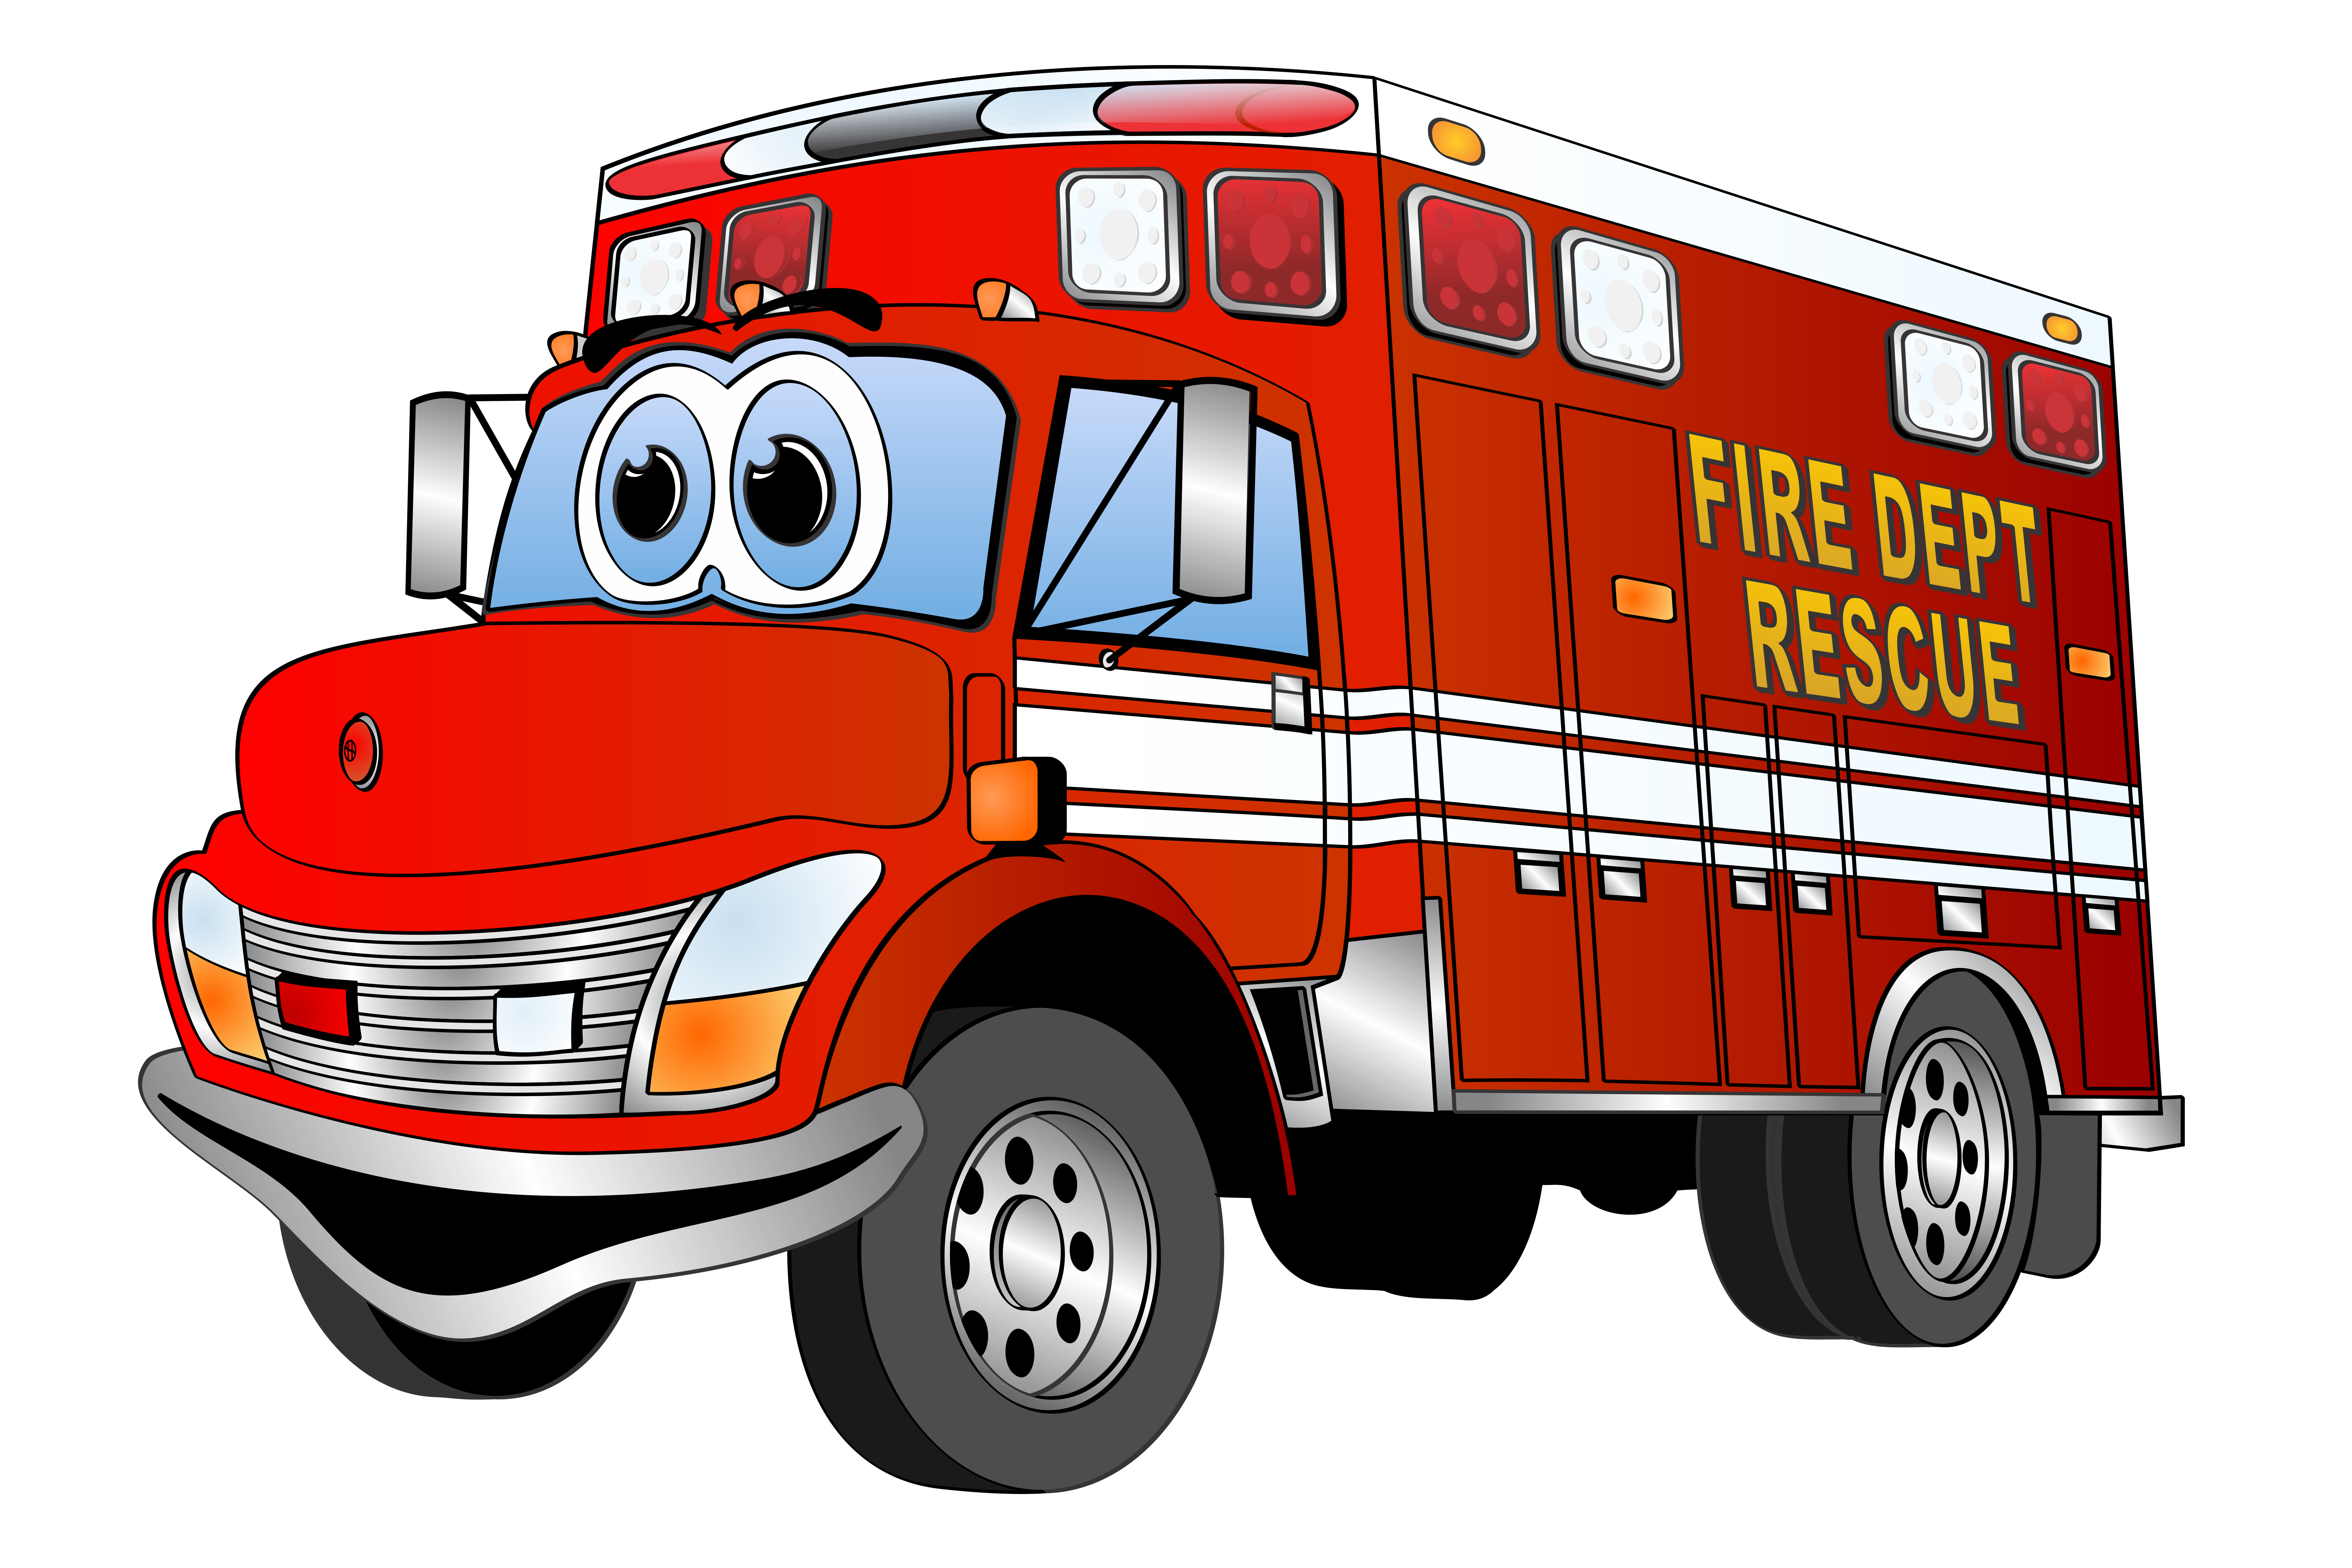 Free Cartoon Fire Truck Pictures, Download Free Clip Art